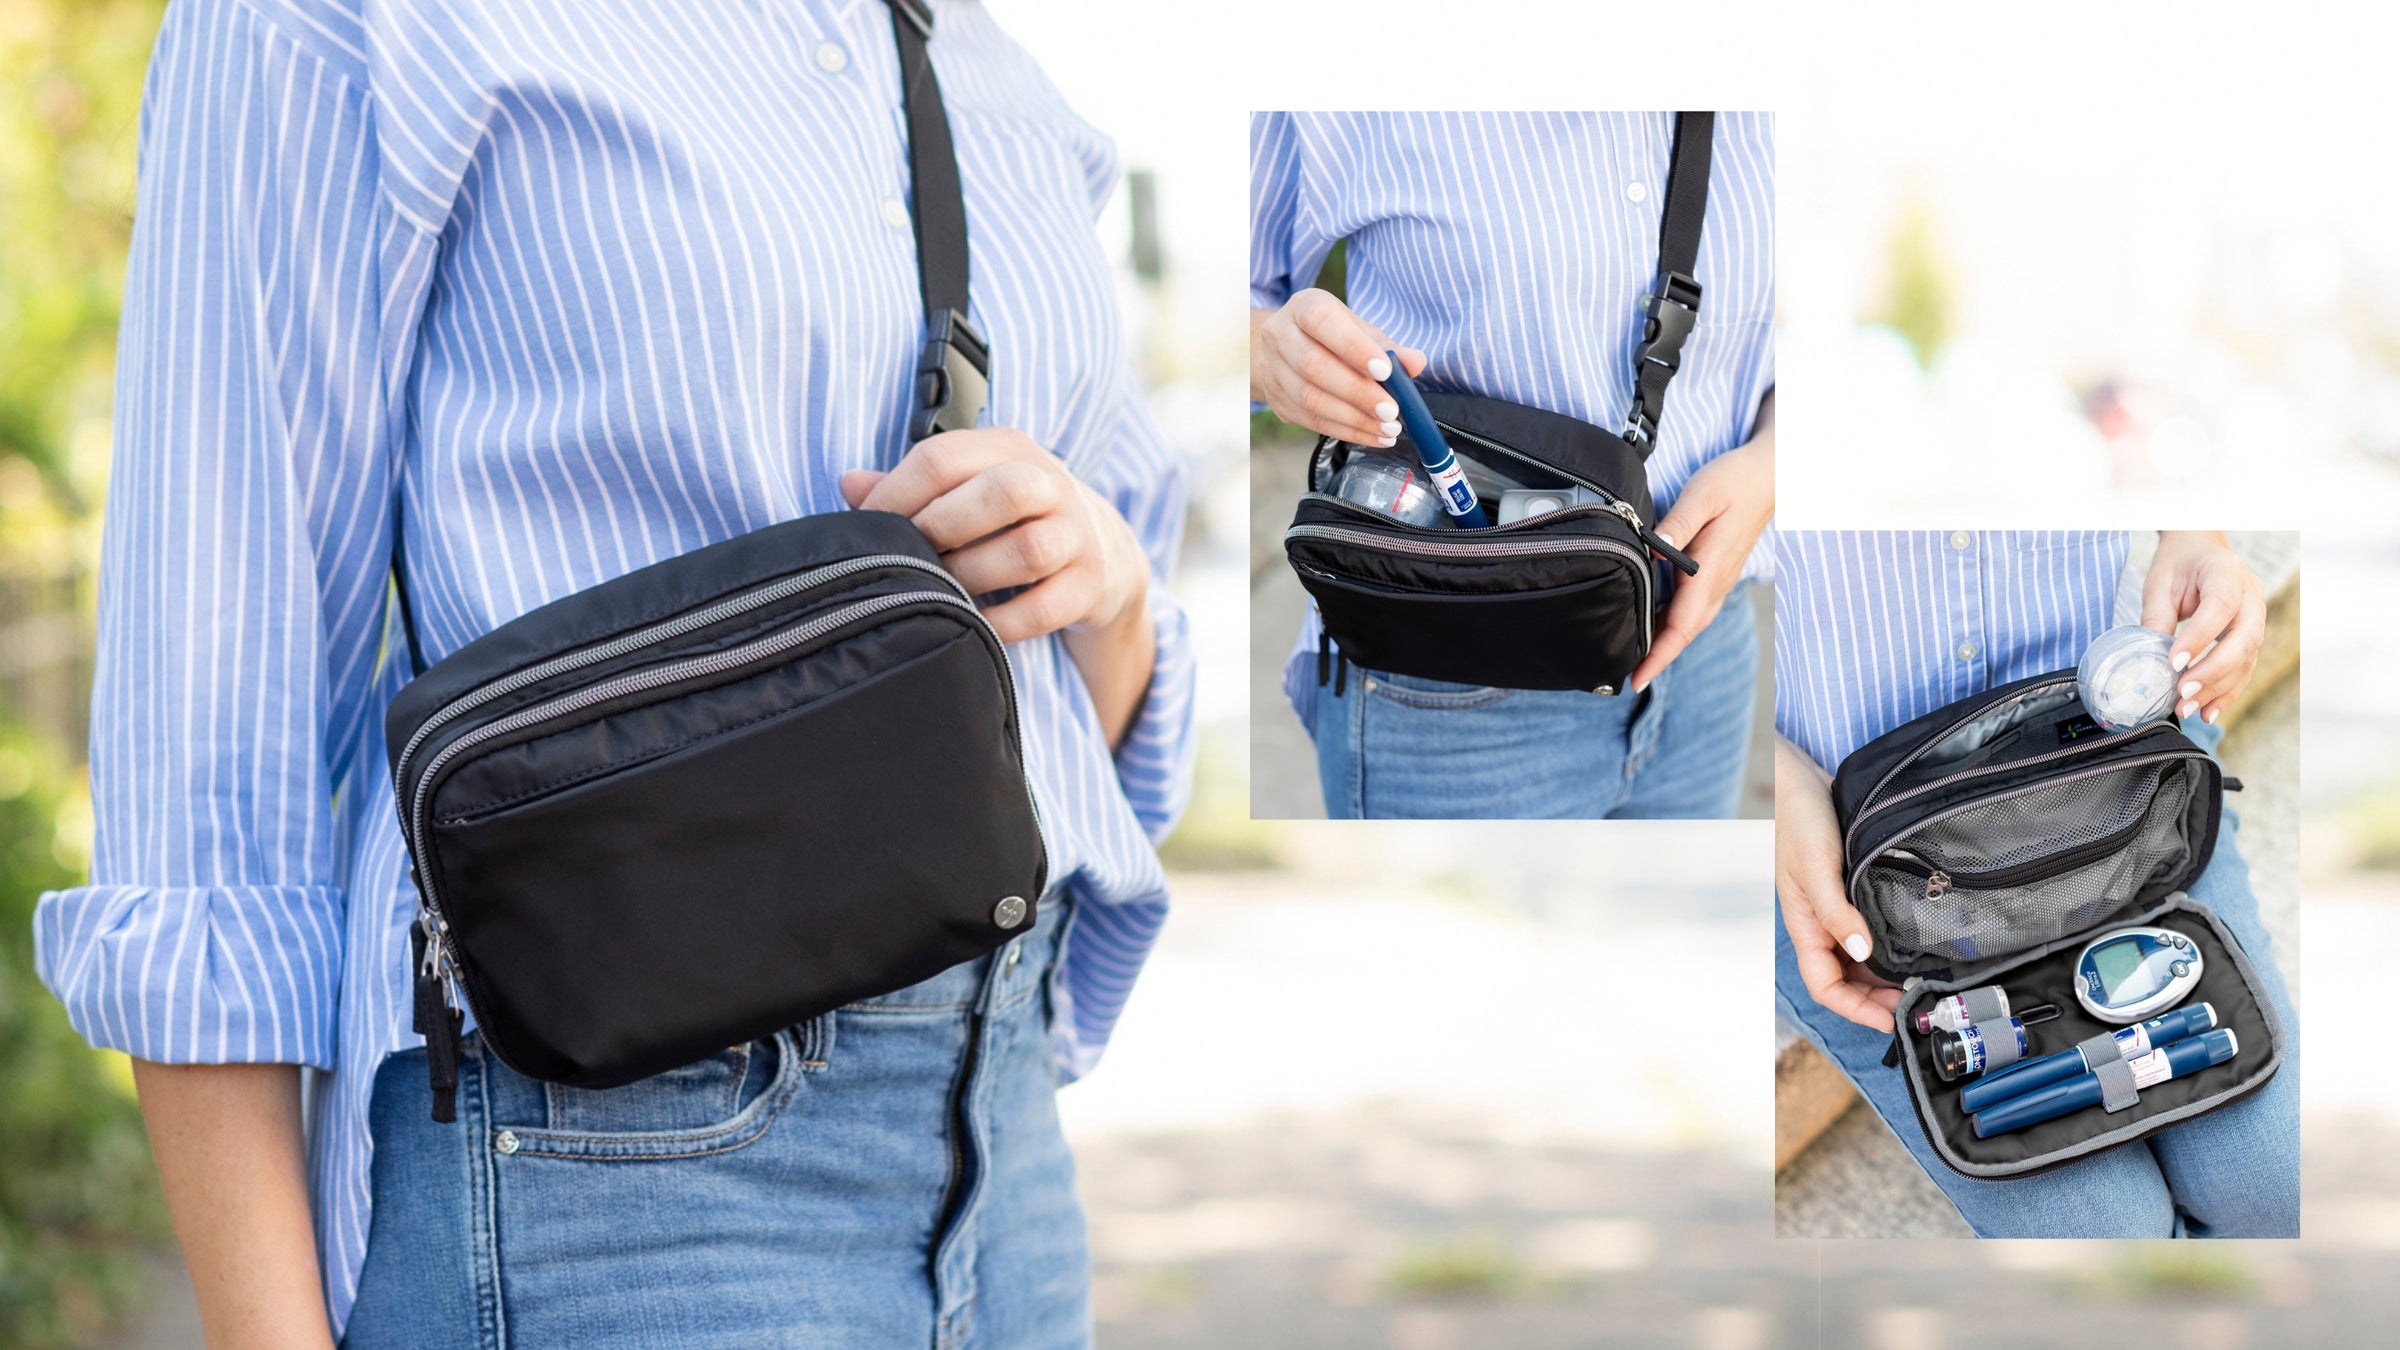 Insulated Diabetes Sling Bag by Sugar Medical